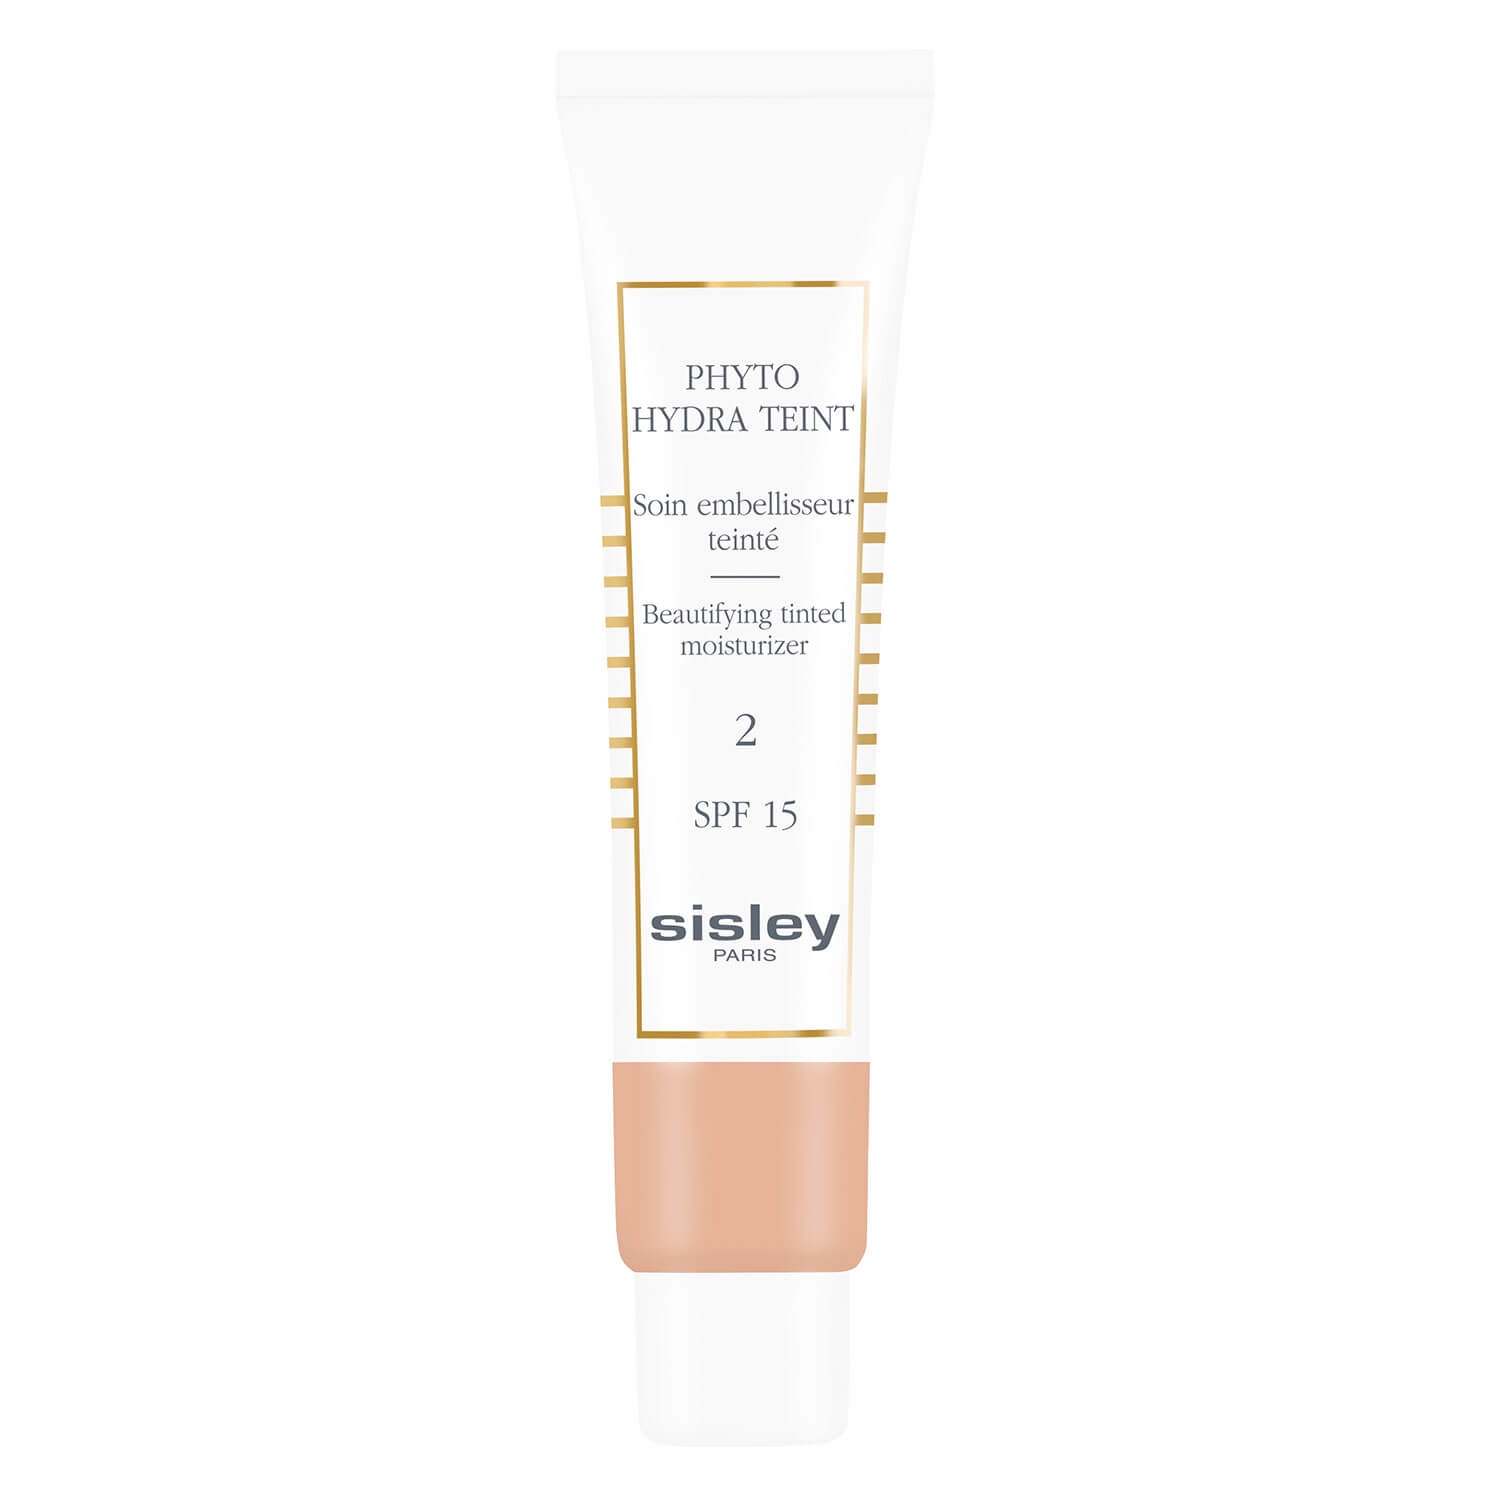 Product image from Phyto Hydra Teint - Soin Embelisseur Teinté Medium 2 SPF 15